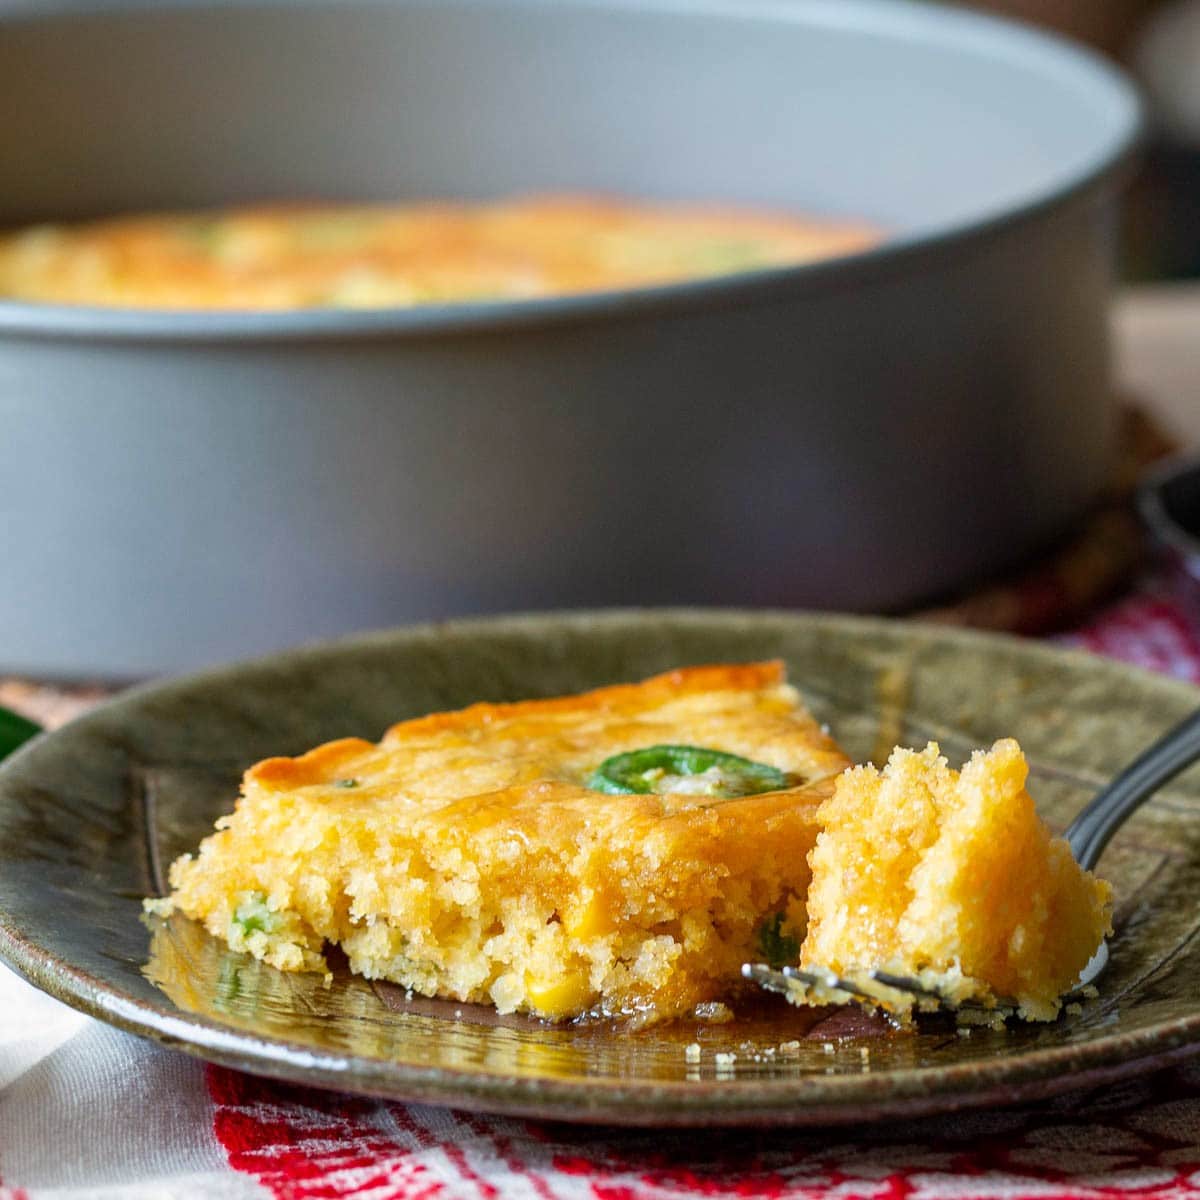 Our ultimate air fryer Jiffy Cornbread served on a green plate with a fork.